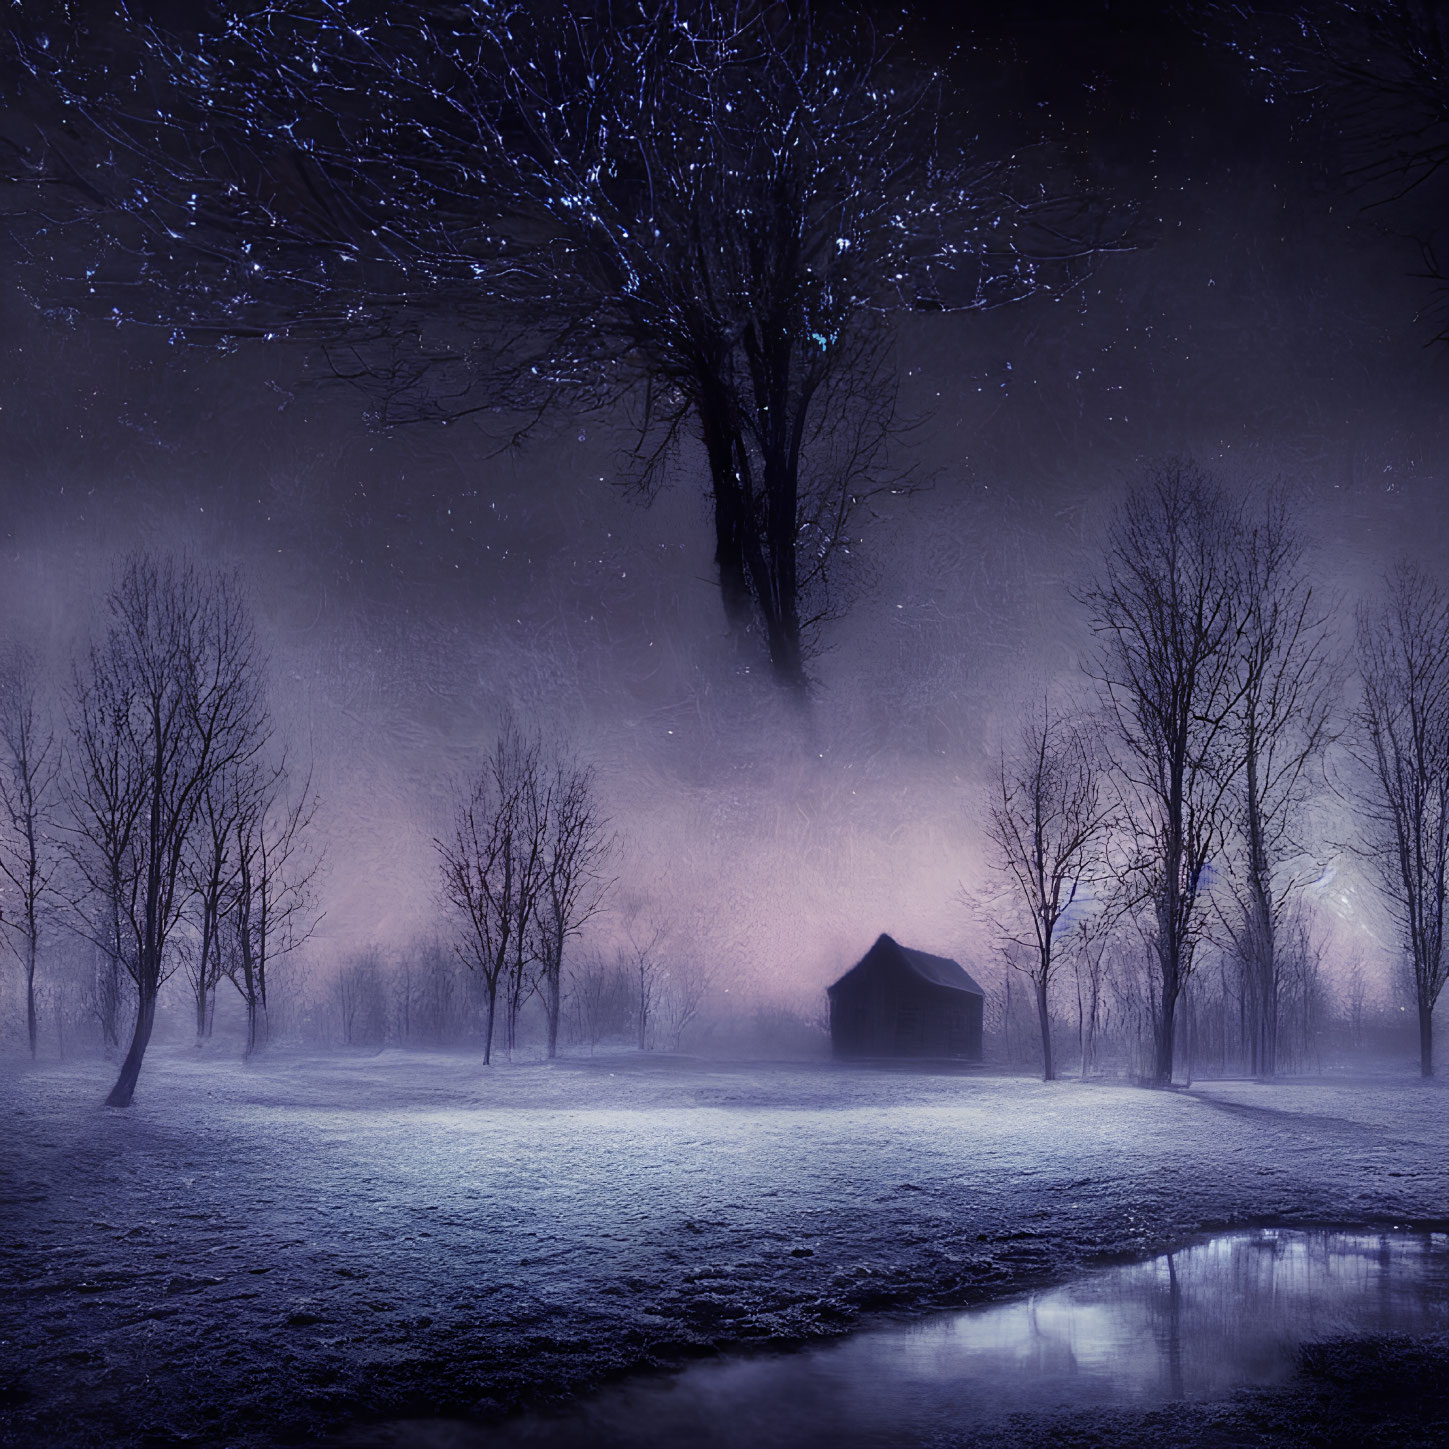 Snowy Night Landscape with Solitary House and Starry Sky